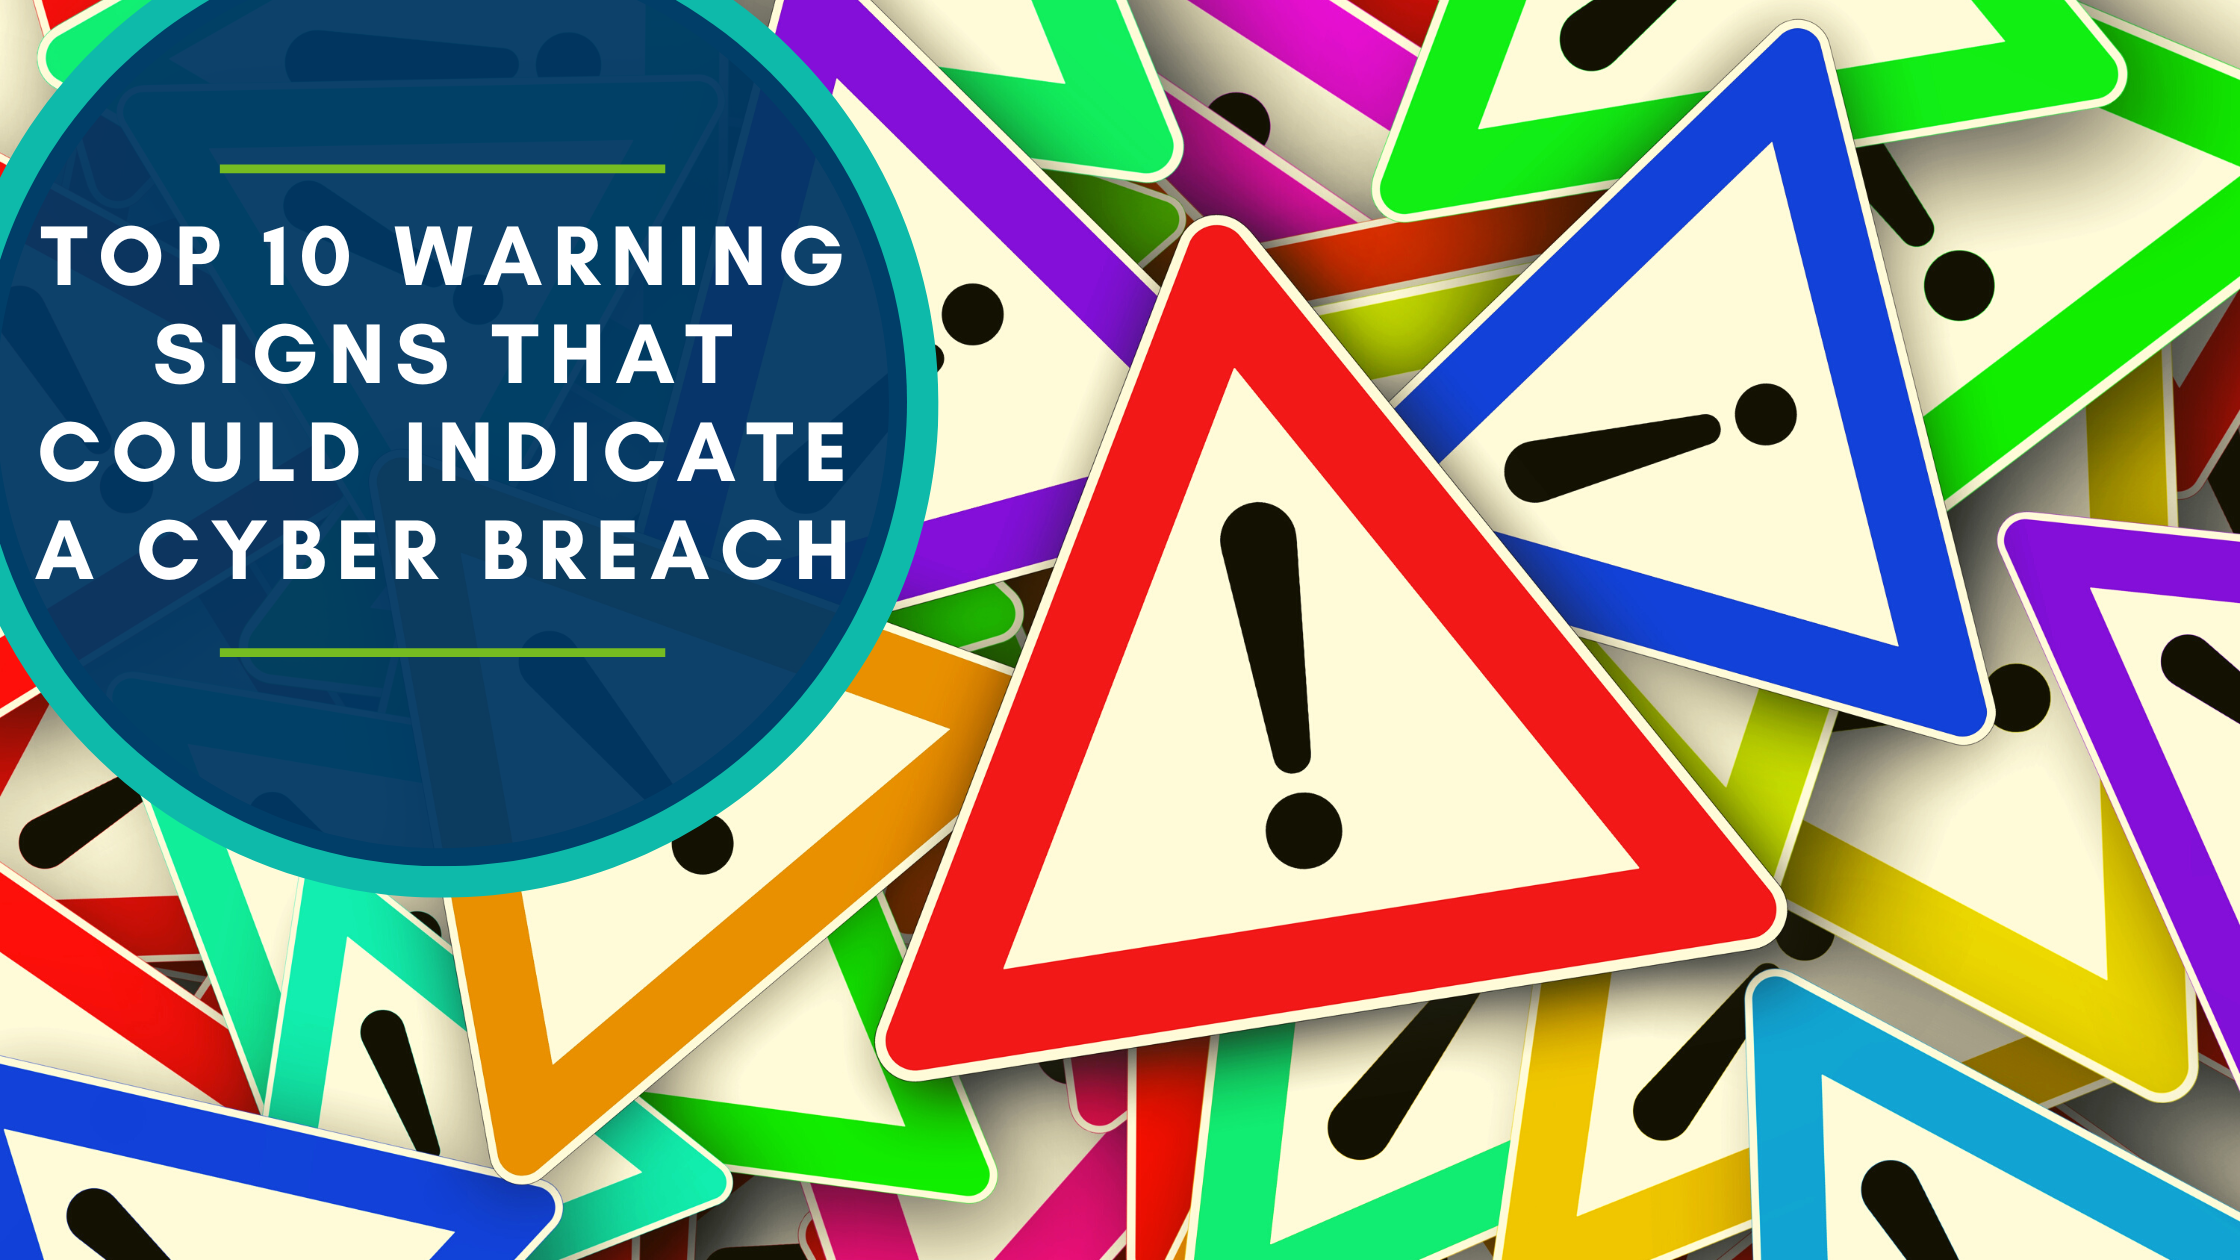 Top 10 Warning Signs that Could Indicate a Cyber Breach